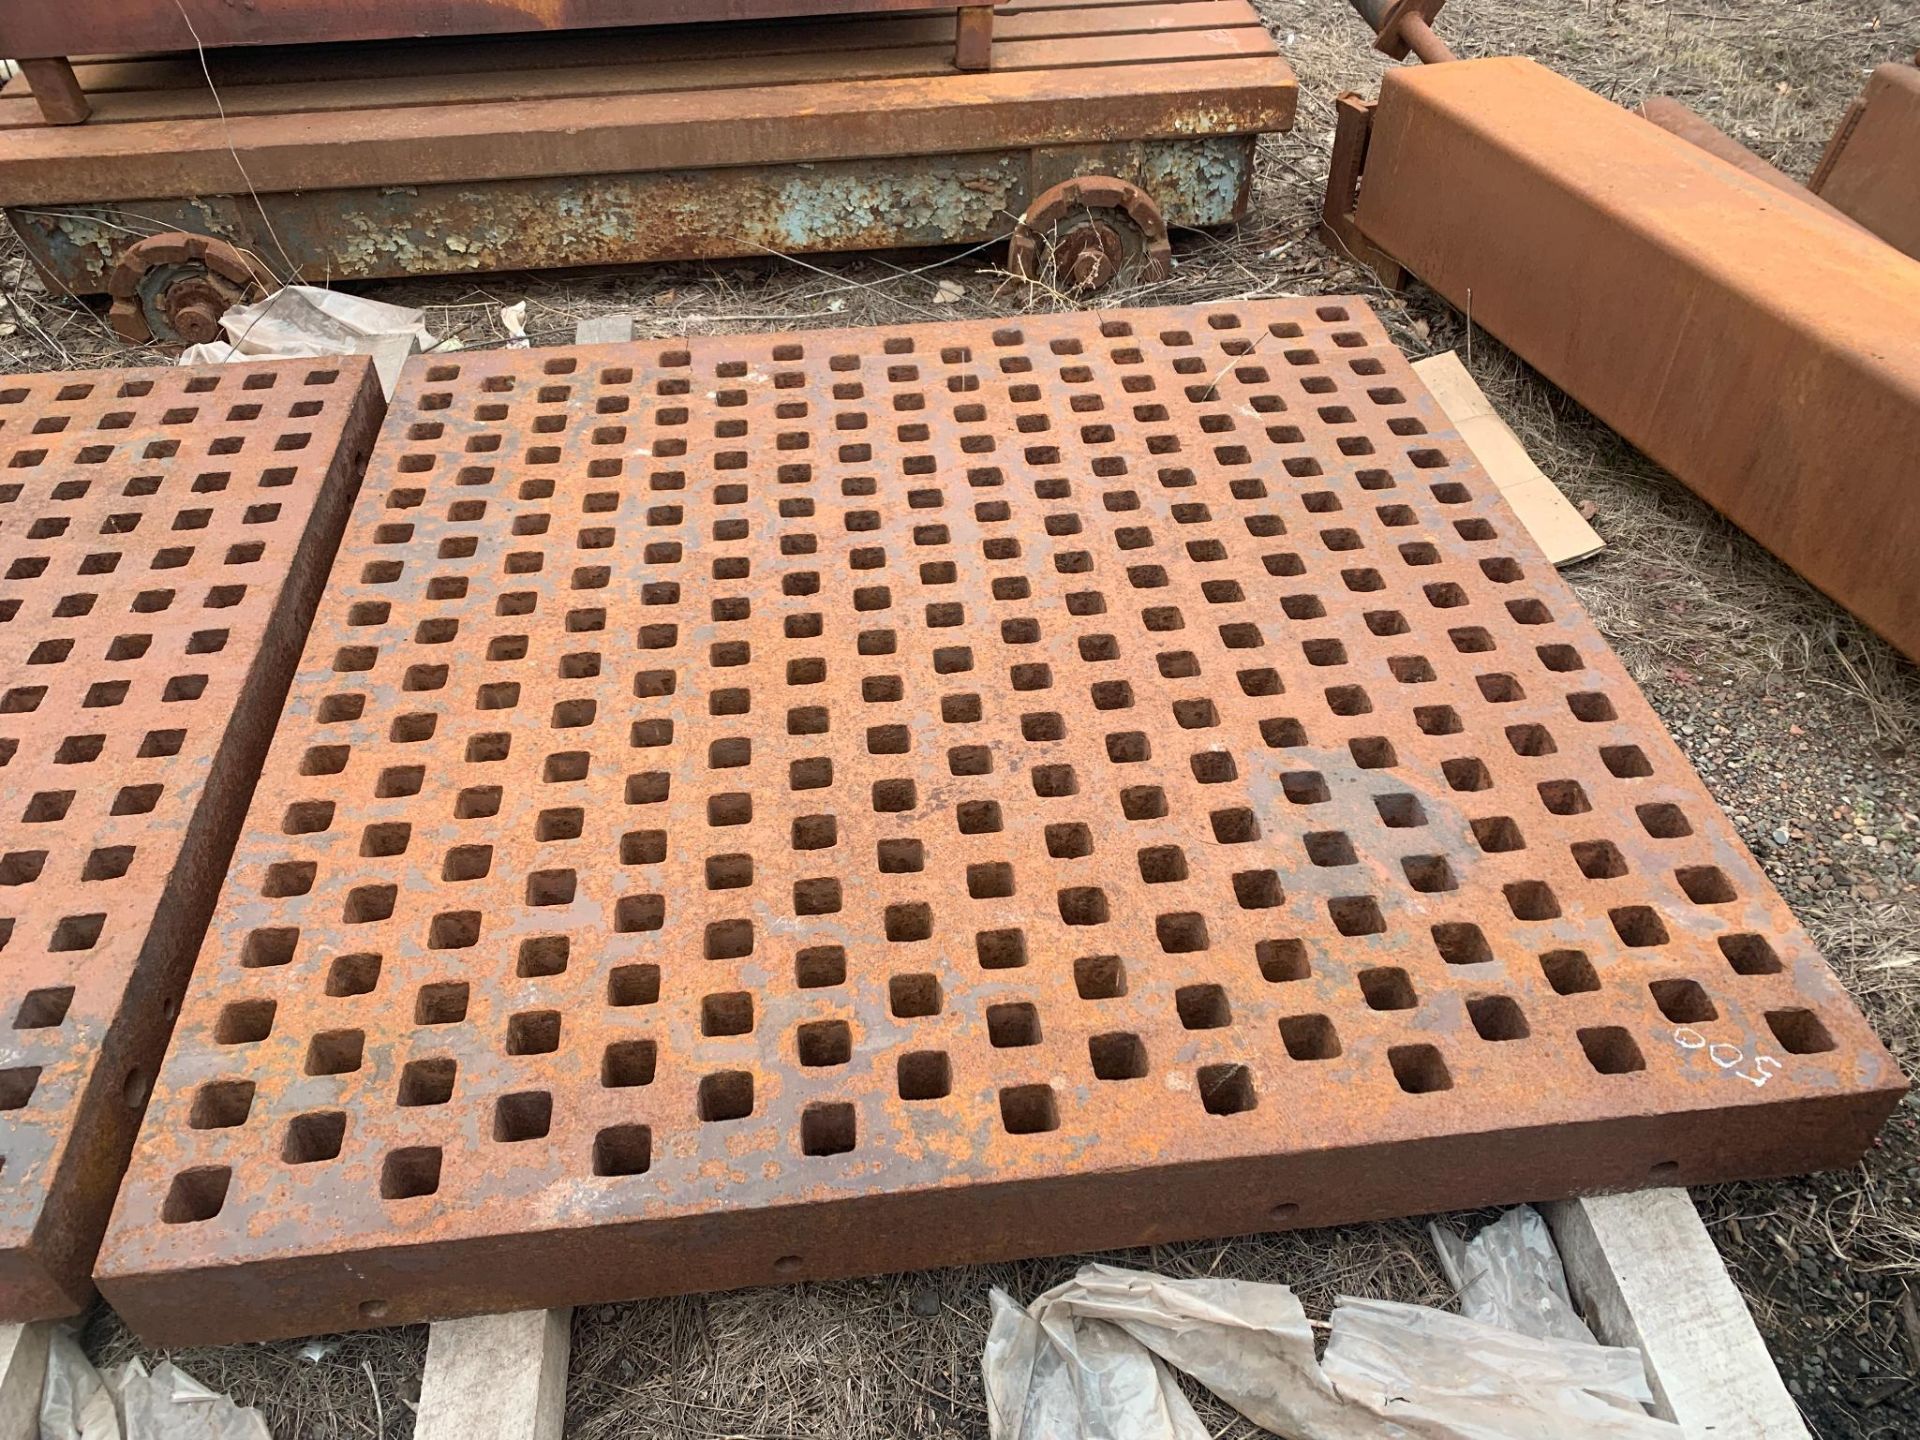 Acorn Style Welding Platen. Approx 61.5" x 61.5" x 5.25" deep with 2" square holes. Note: Small crac